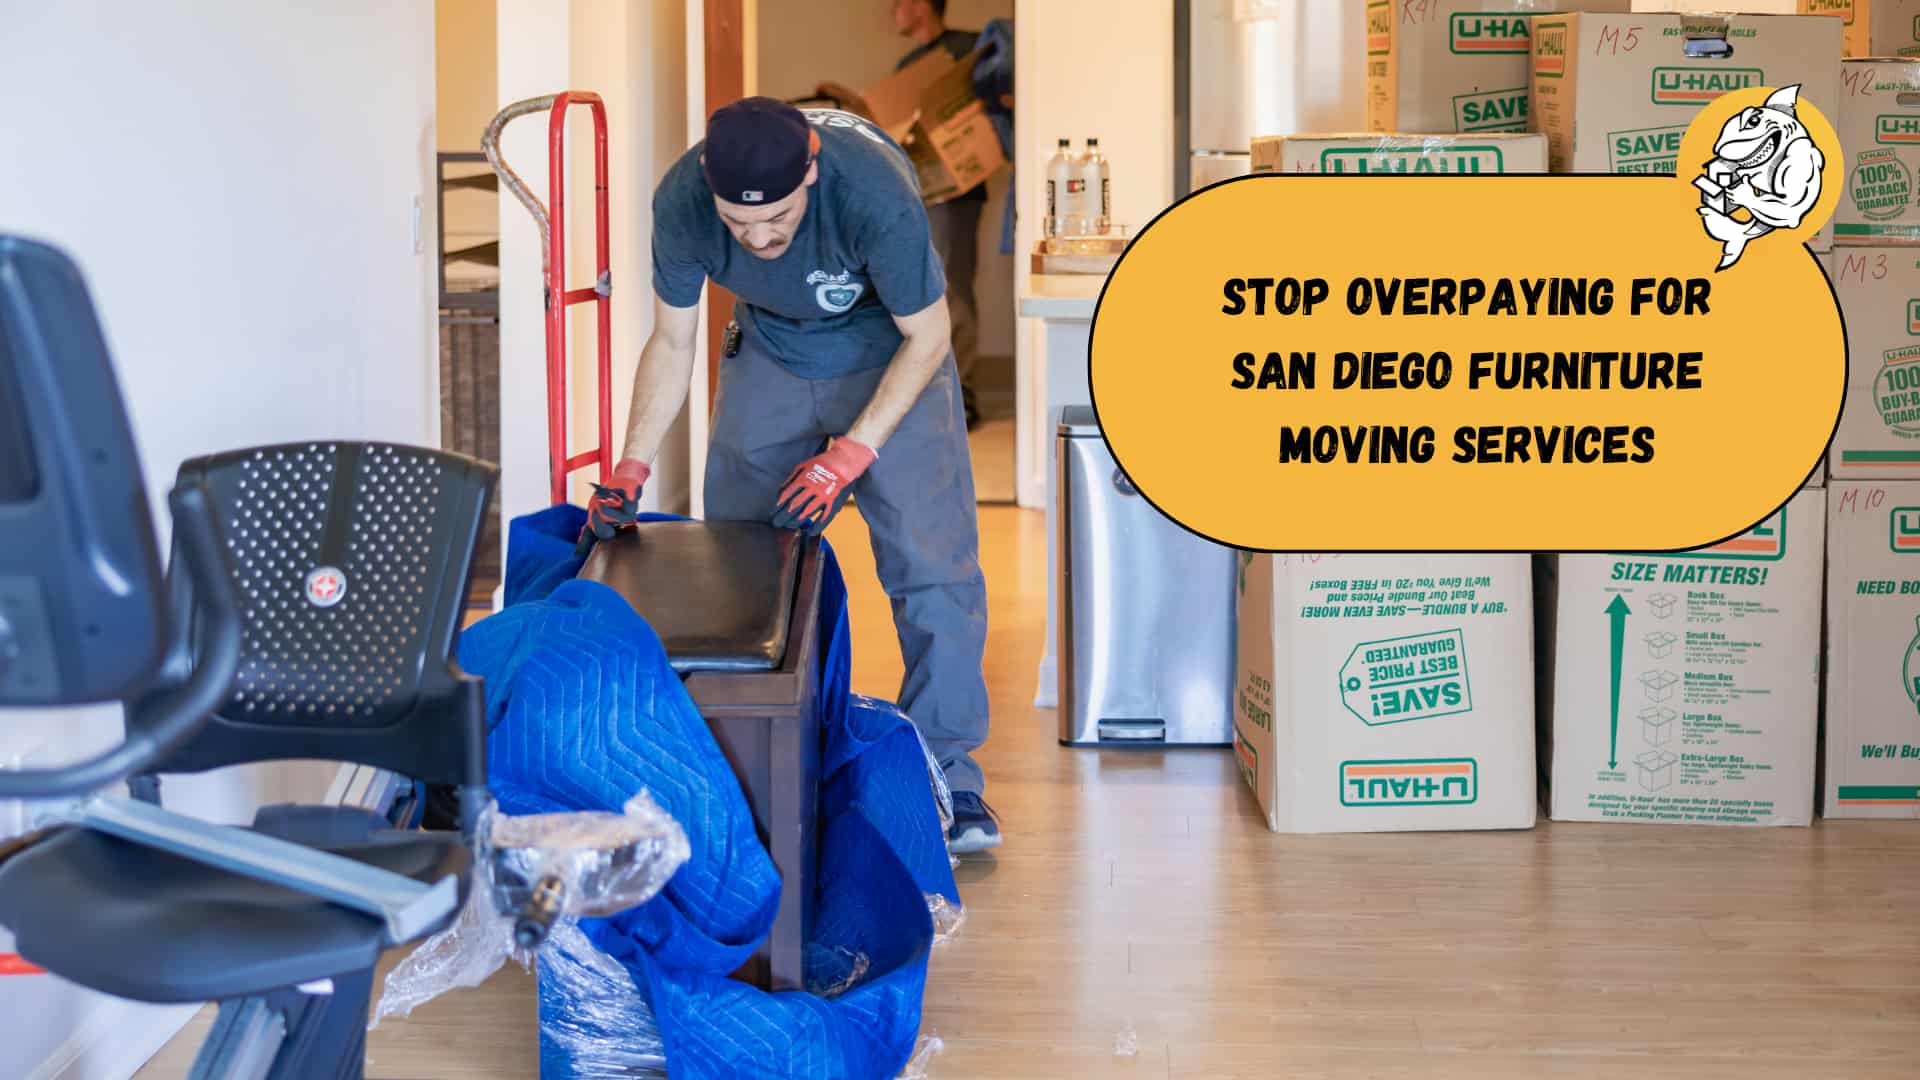 San Diego Furniture Moving Services